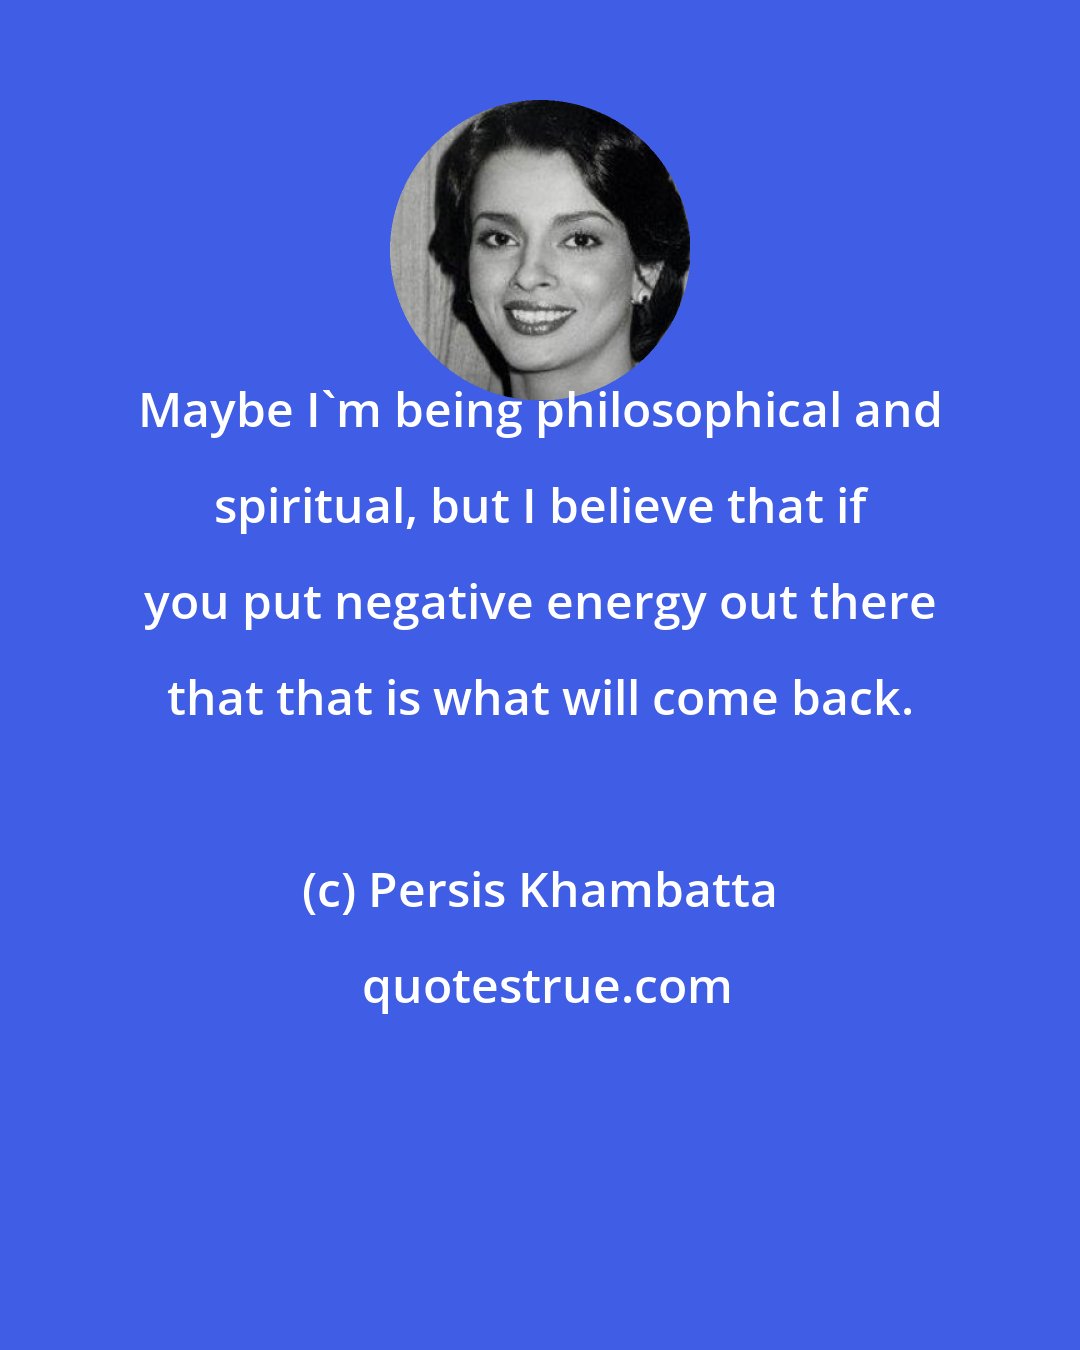 Persis Khambatta: Maybe I'm being philosophical and spiritual, but I believe that if you put negative energy out there that that is what will come back.